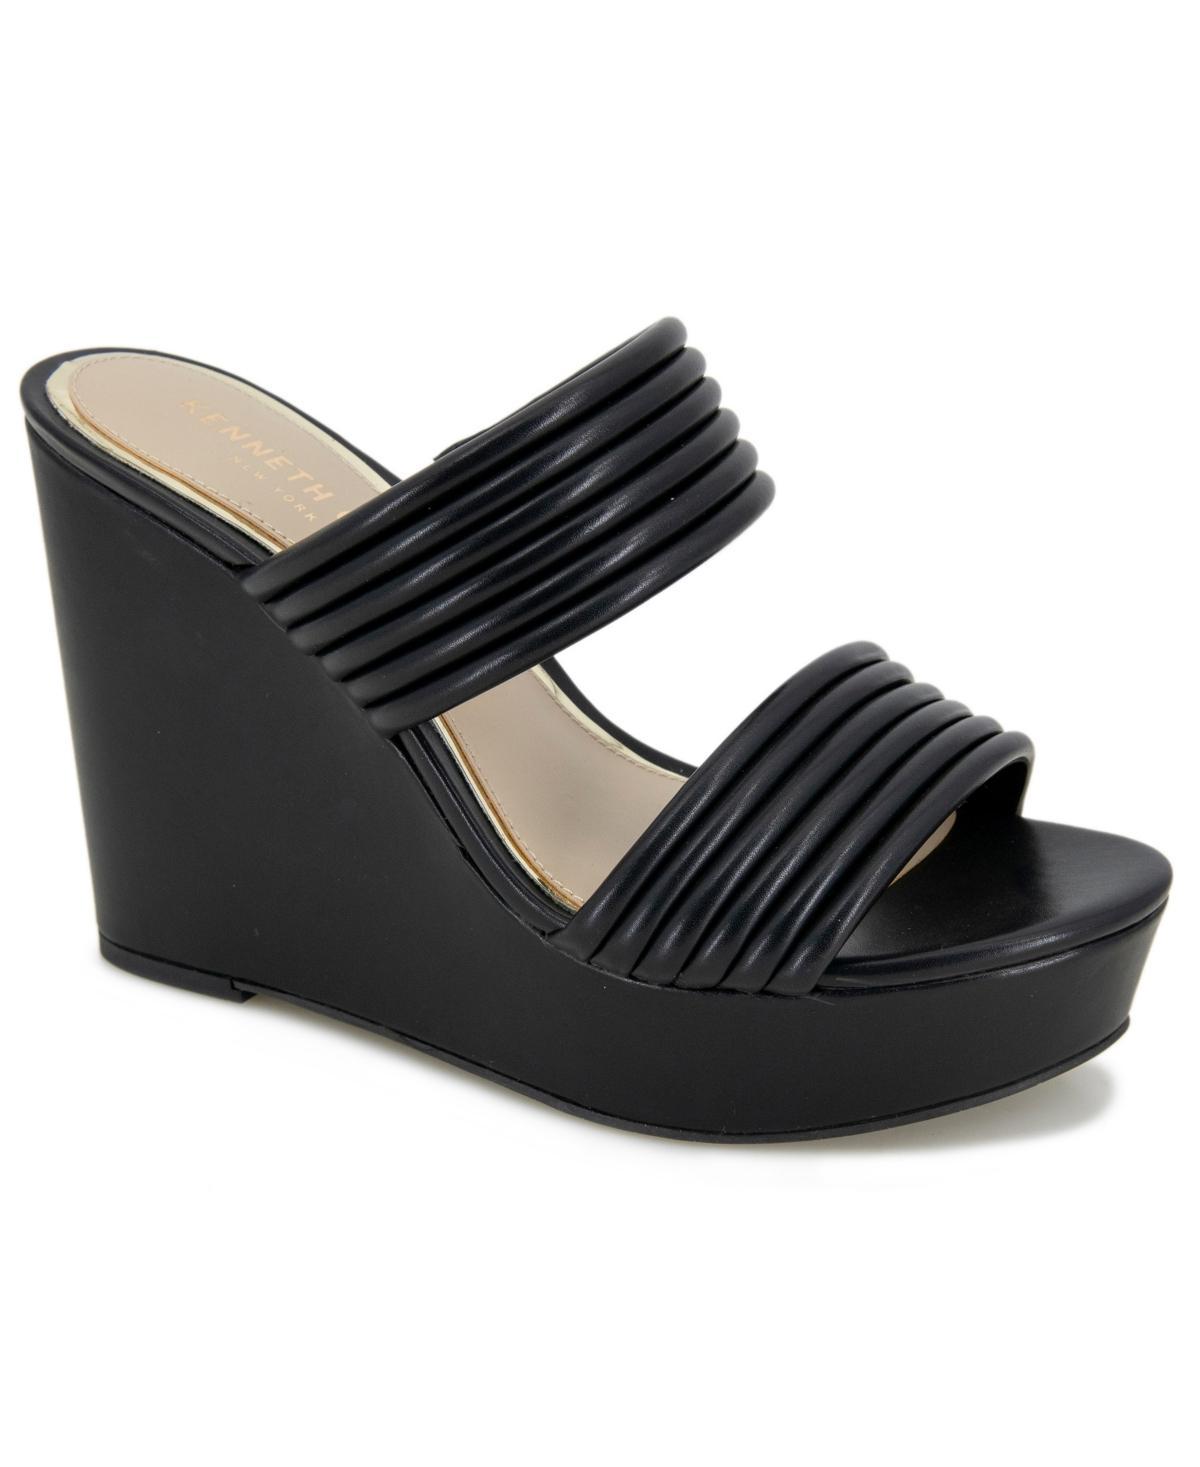 Kenneth Cole Womens Cailyn Wedge Heel Sandals - Black Product Image